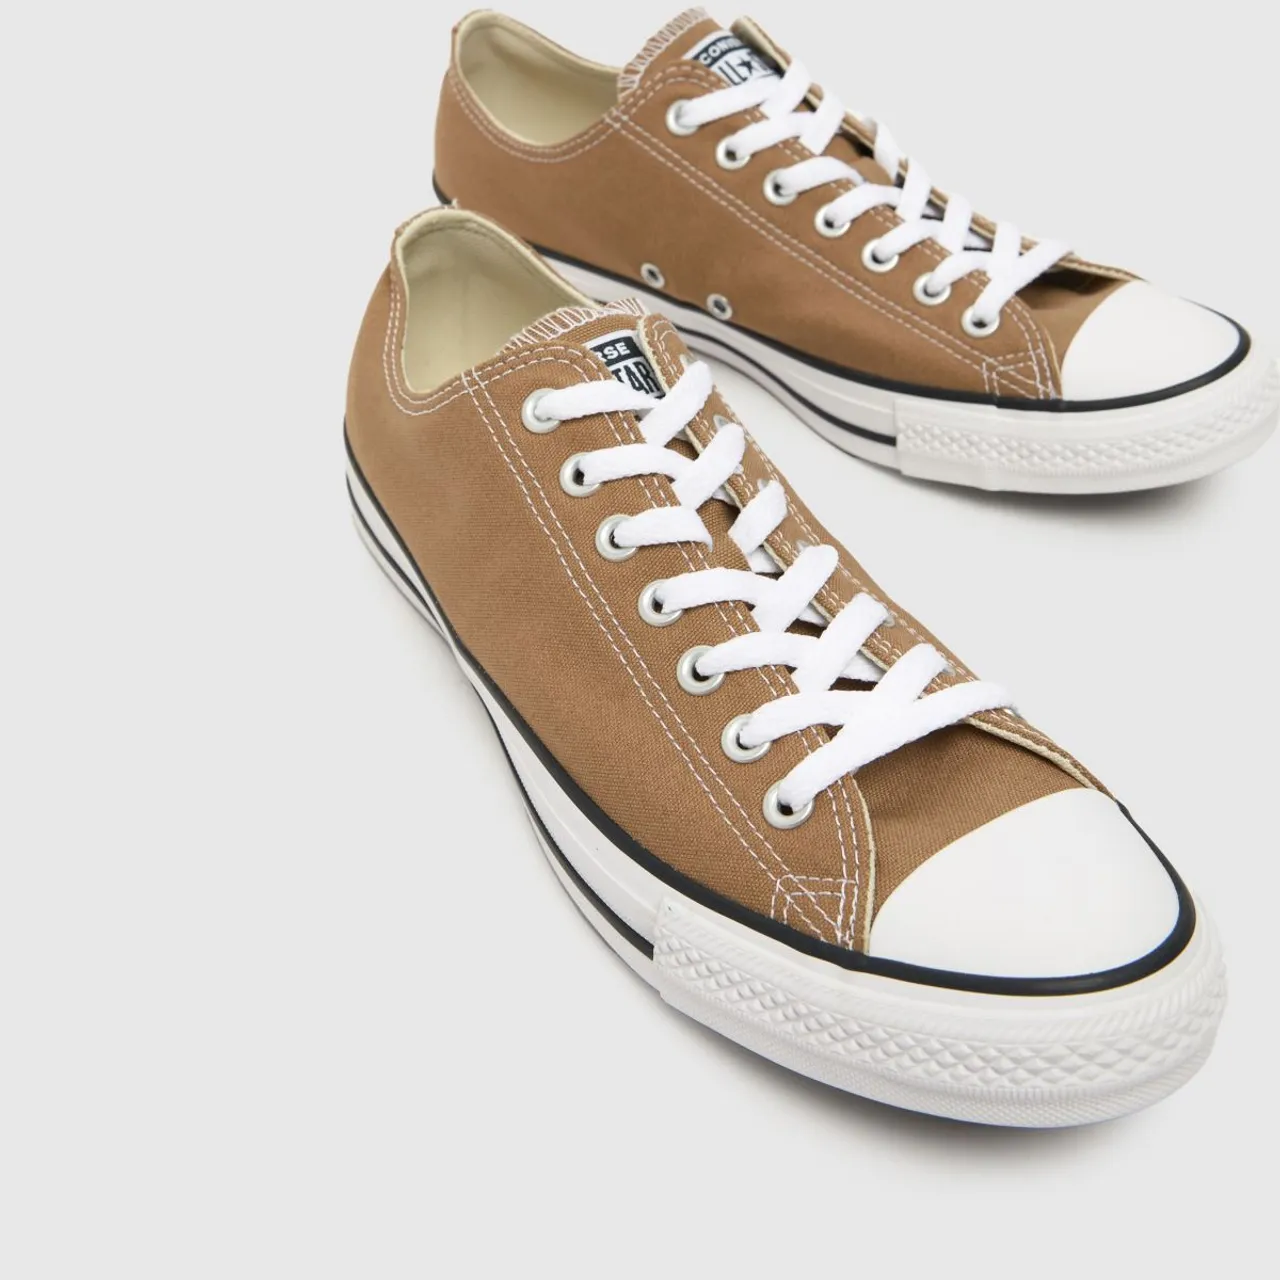 Converse all Star ox Trainers in Tan